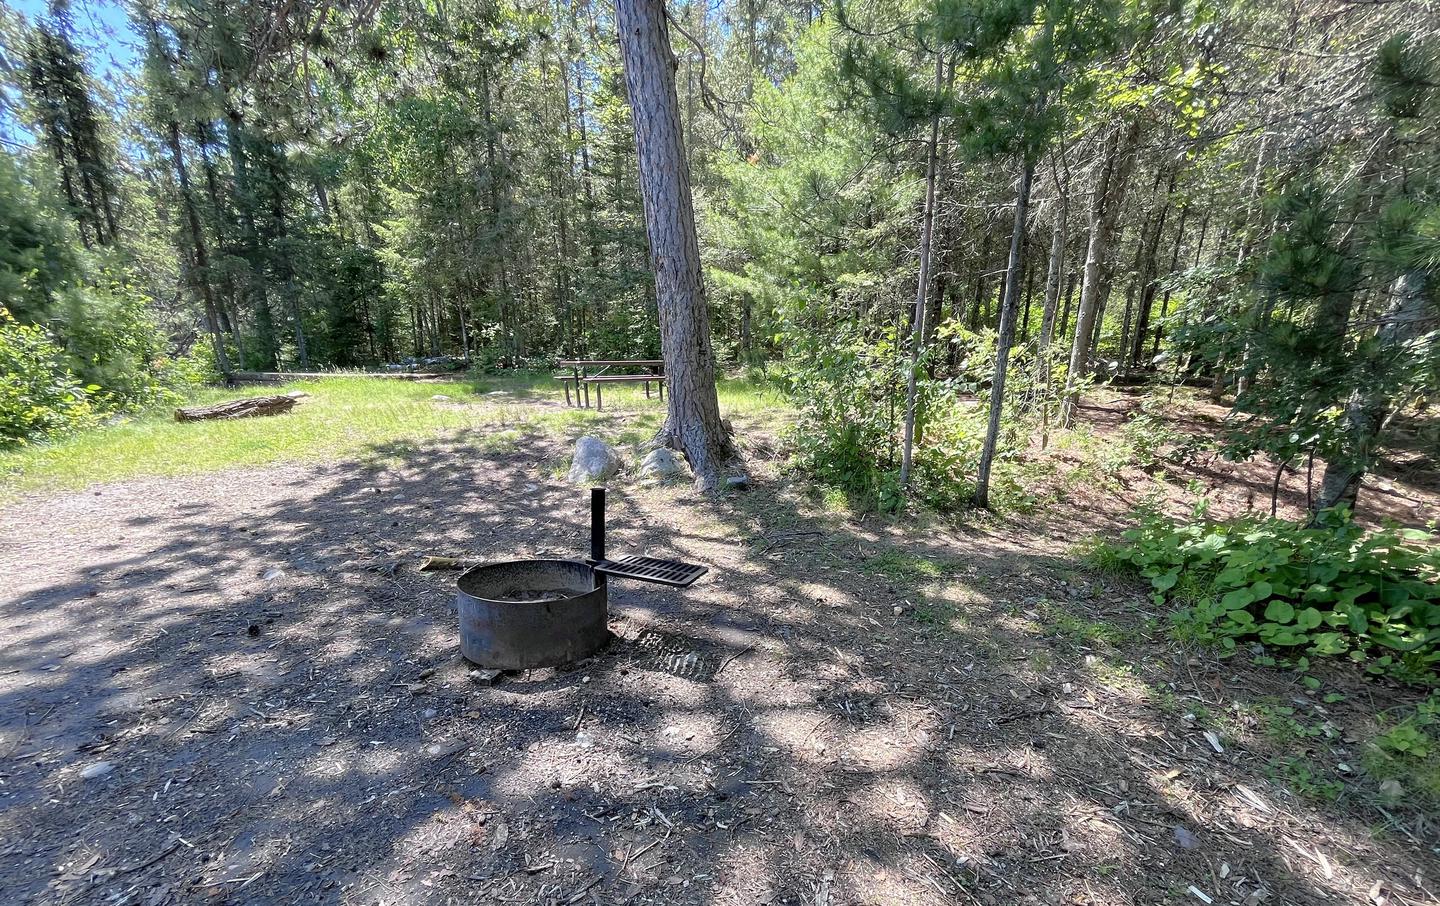 S23 - Grassy Bay South, view of campsite core of the fire ring, picnic table and a tent pad in the background with tall trees surrounding the areaView into campsite core